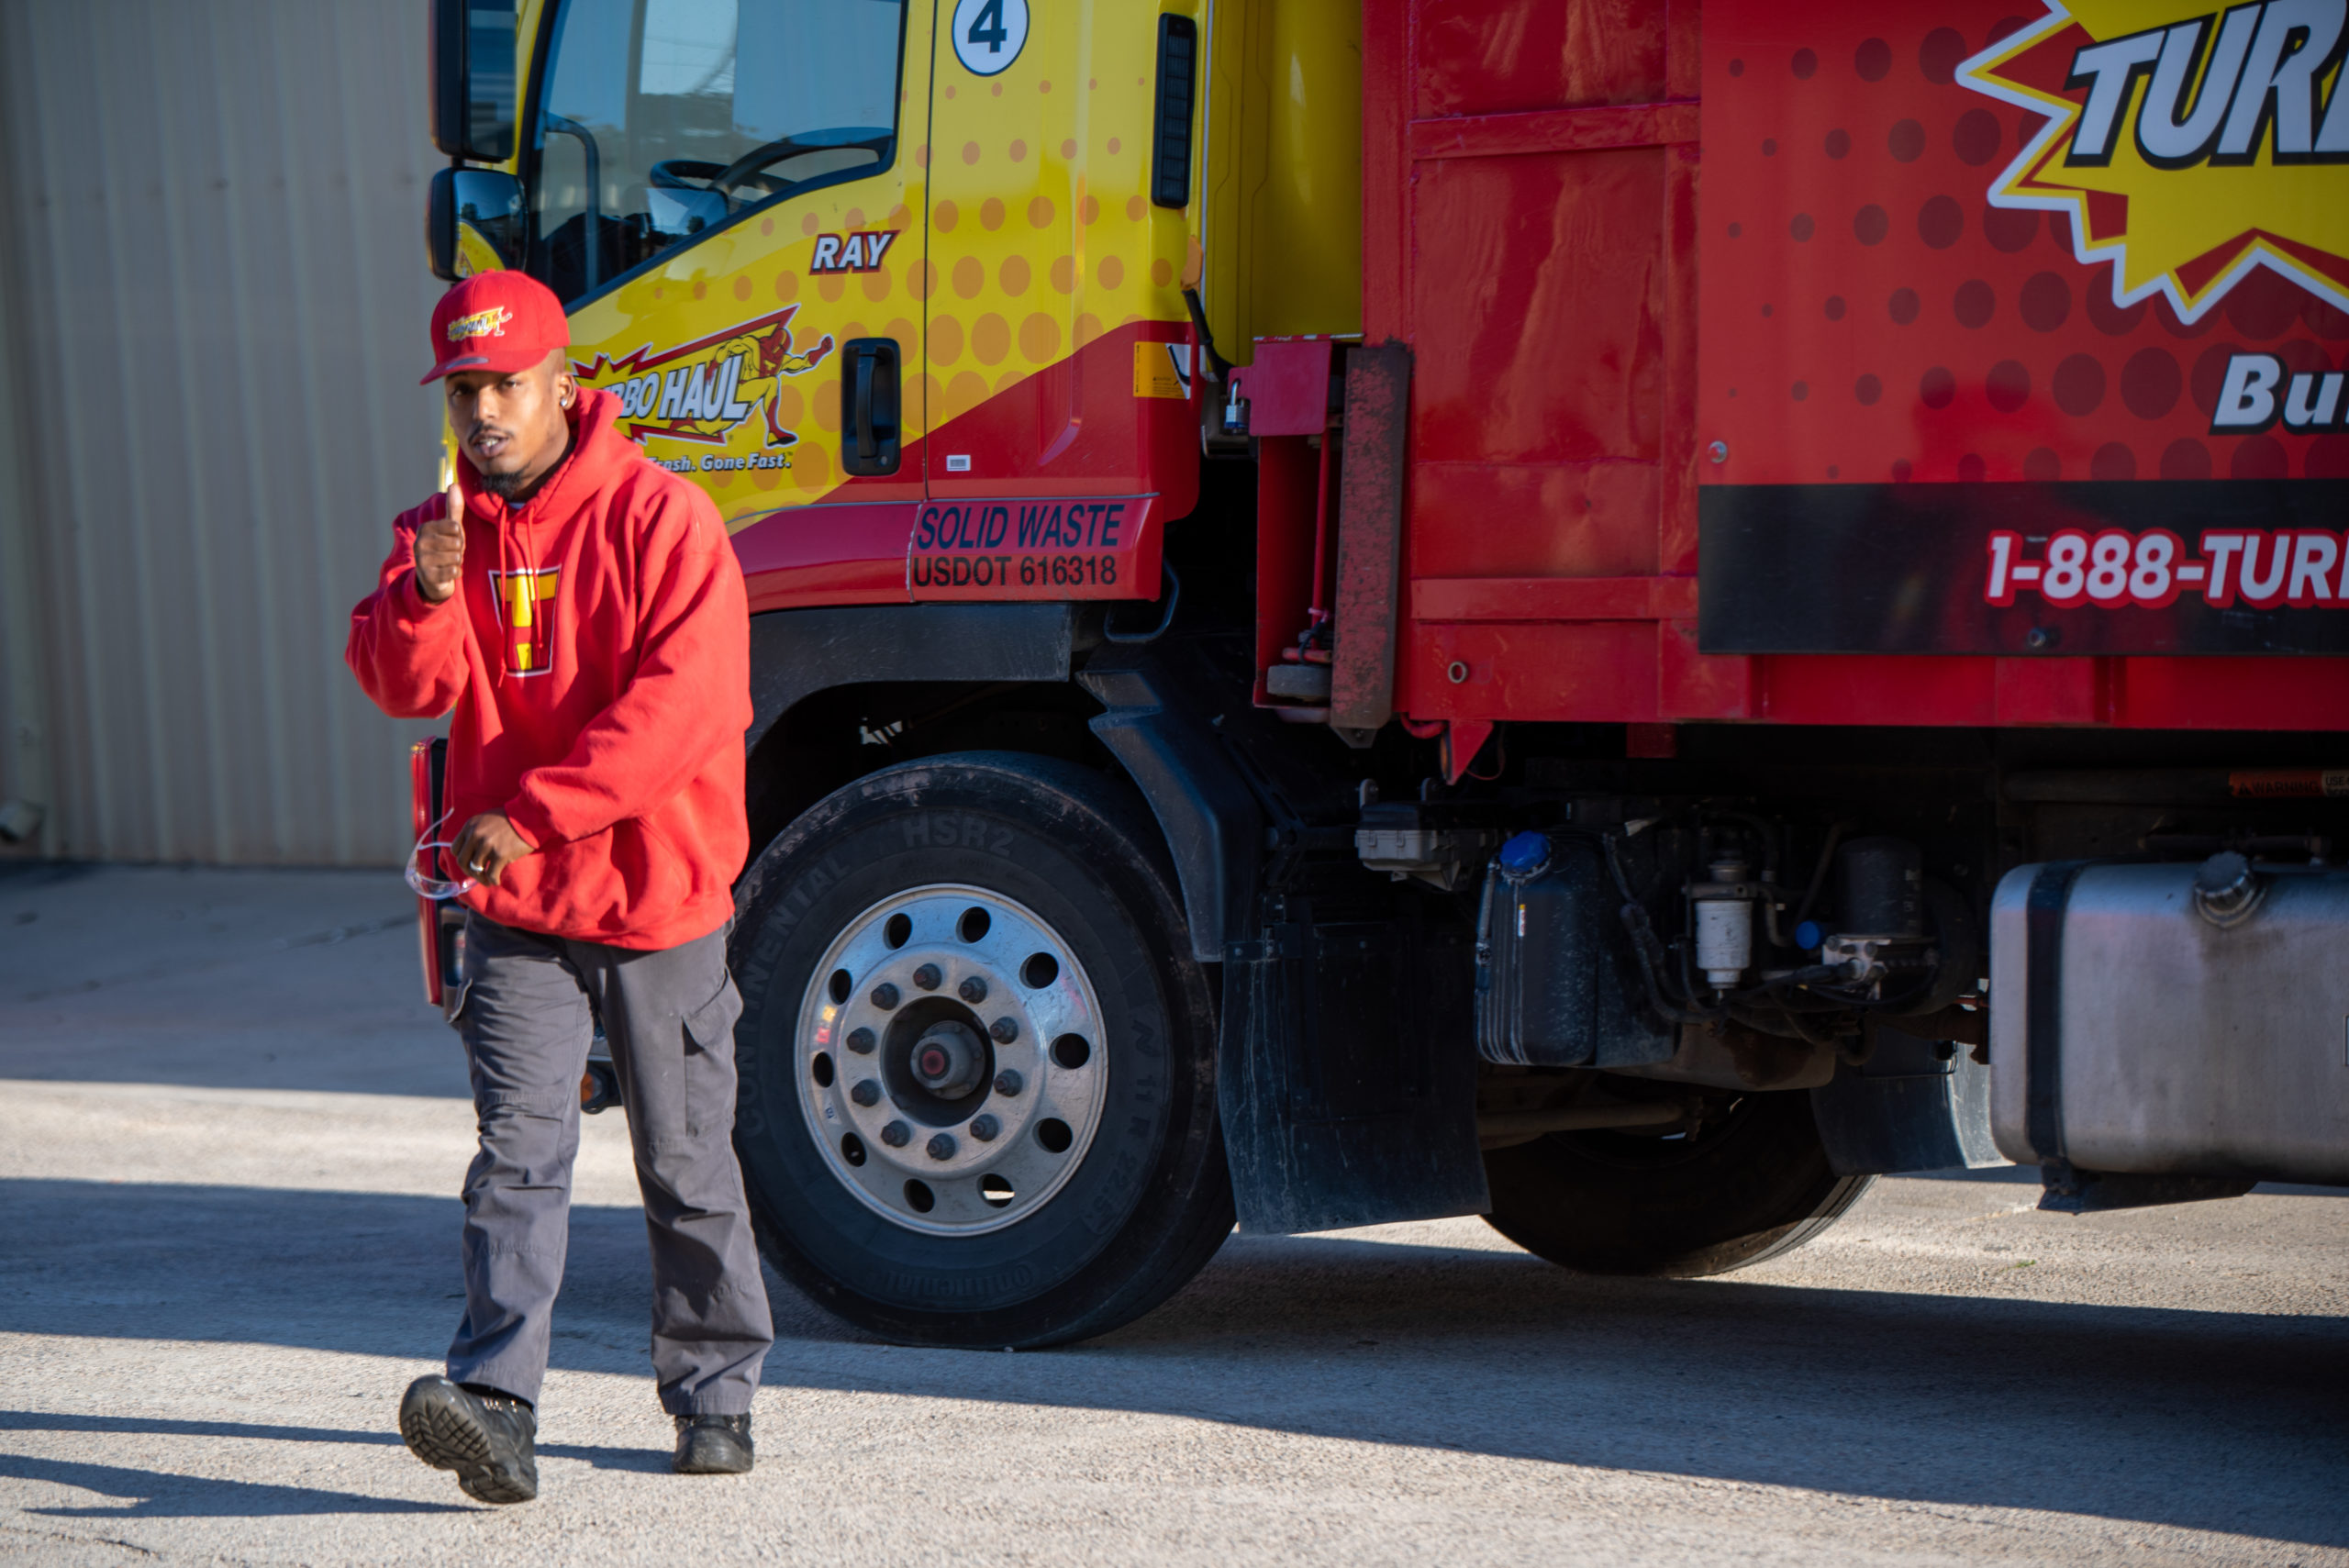 A man gives the thumbs up sign while walking away from a TurboHaul truck